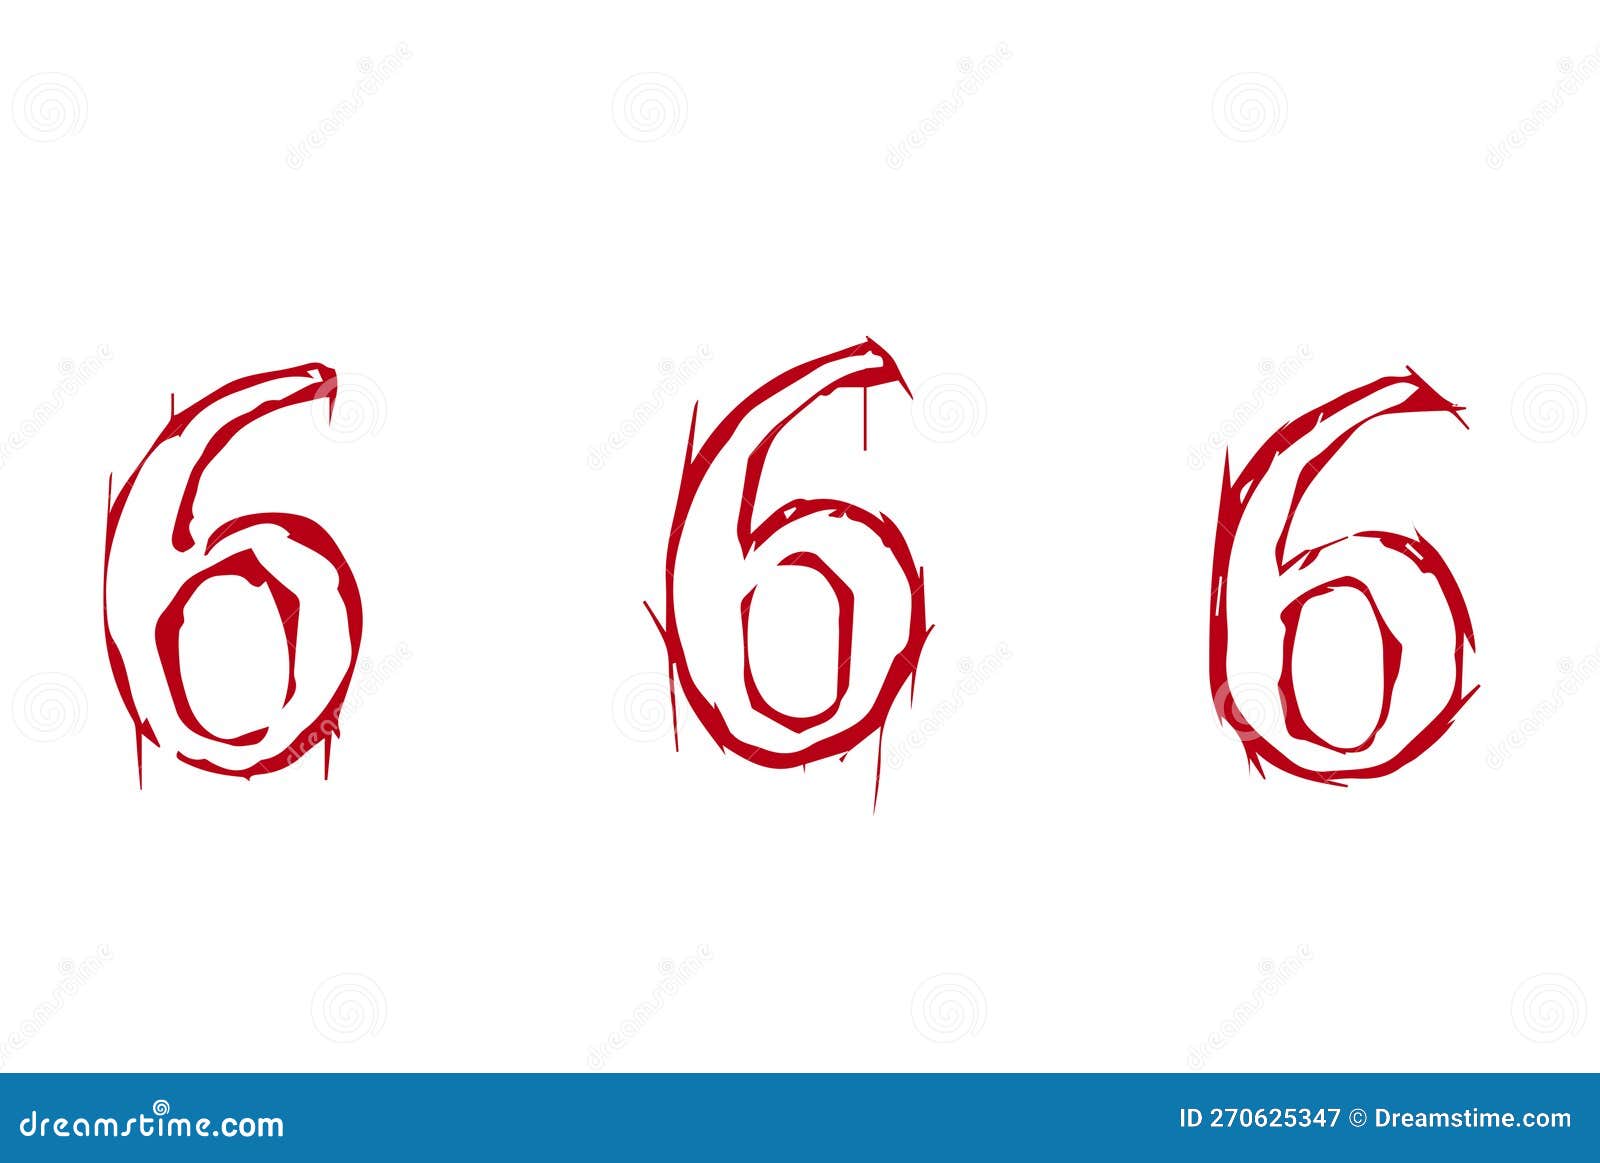 occult number 666.  of demonology and summoning evil demons